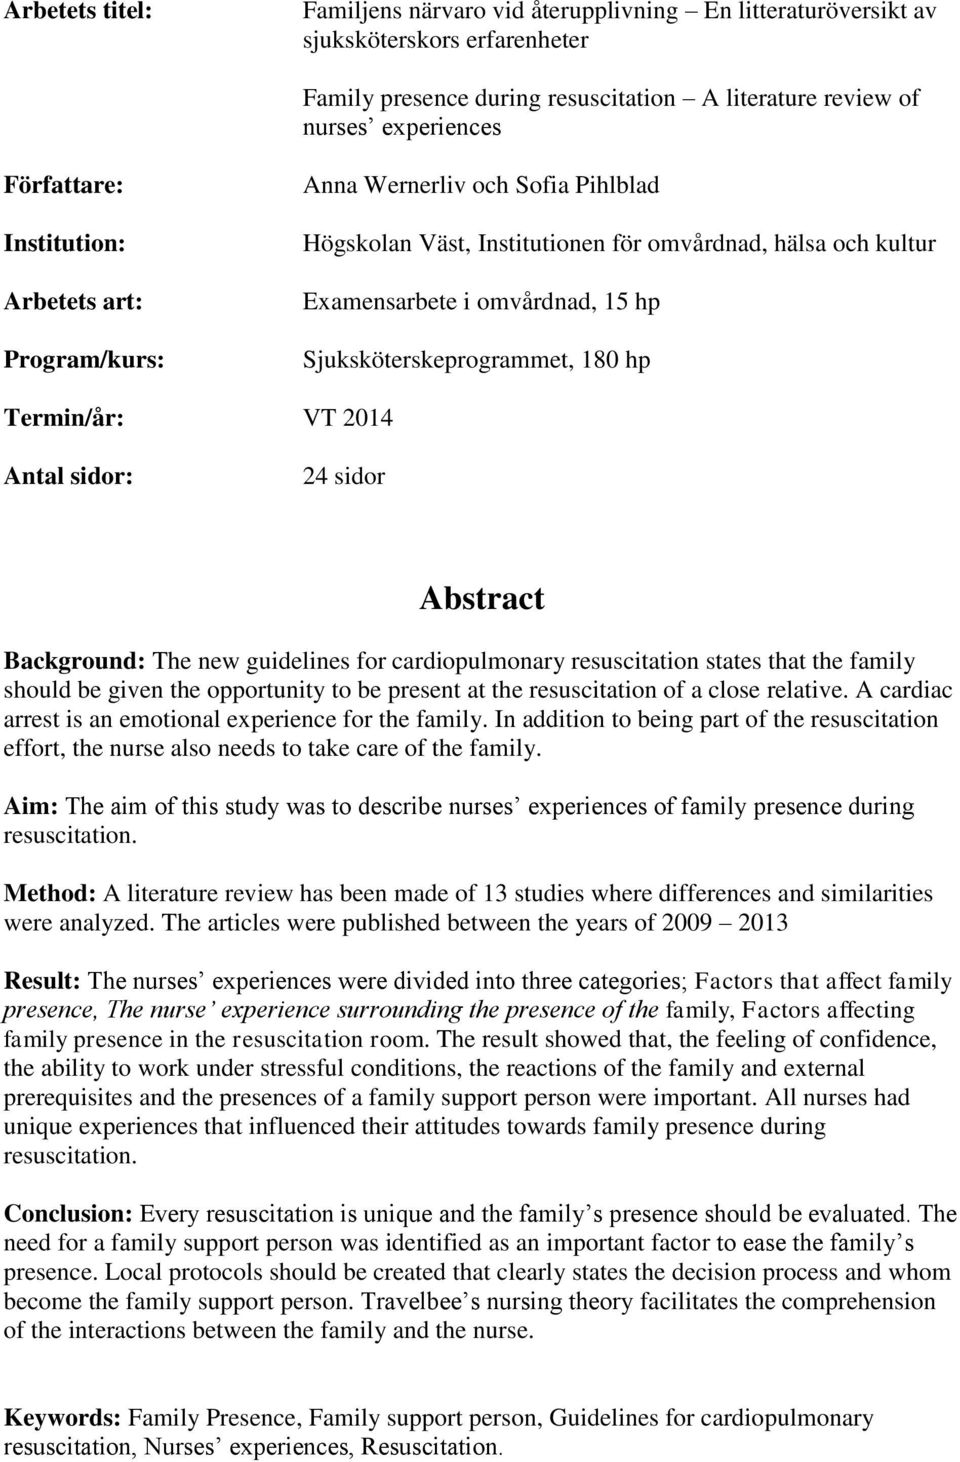 hp Termin/år: VT 2014 Antal sidor: 24 sidor Abstract Background: The new guidelines for cardiopulmonary resuscitation states that the family should be given the opportunity to be present at the